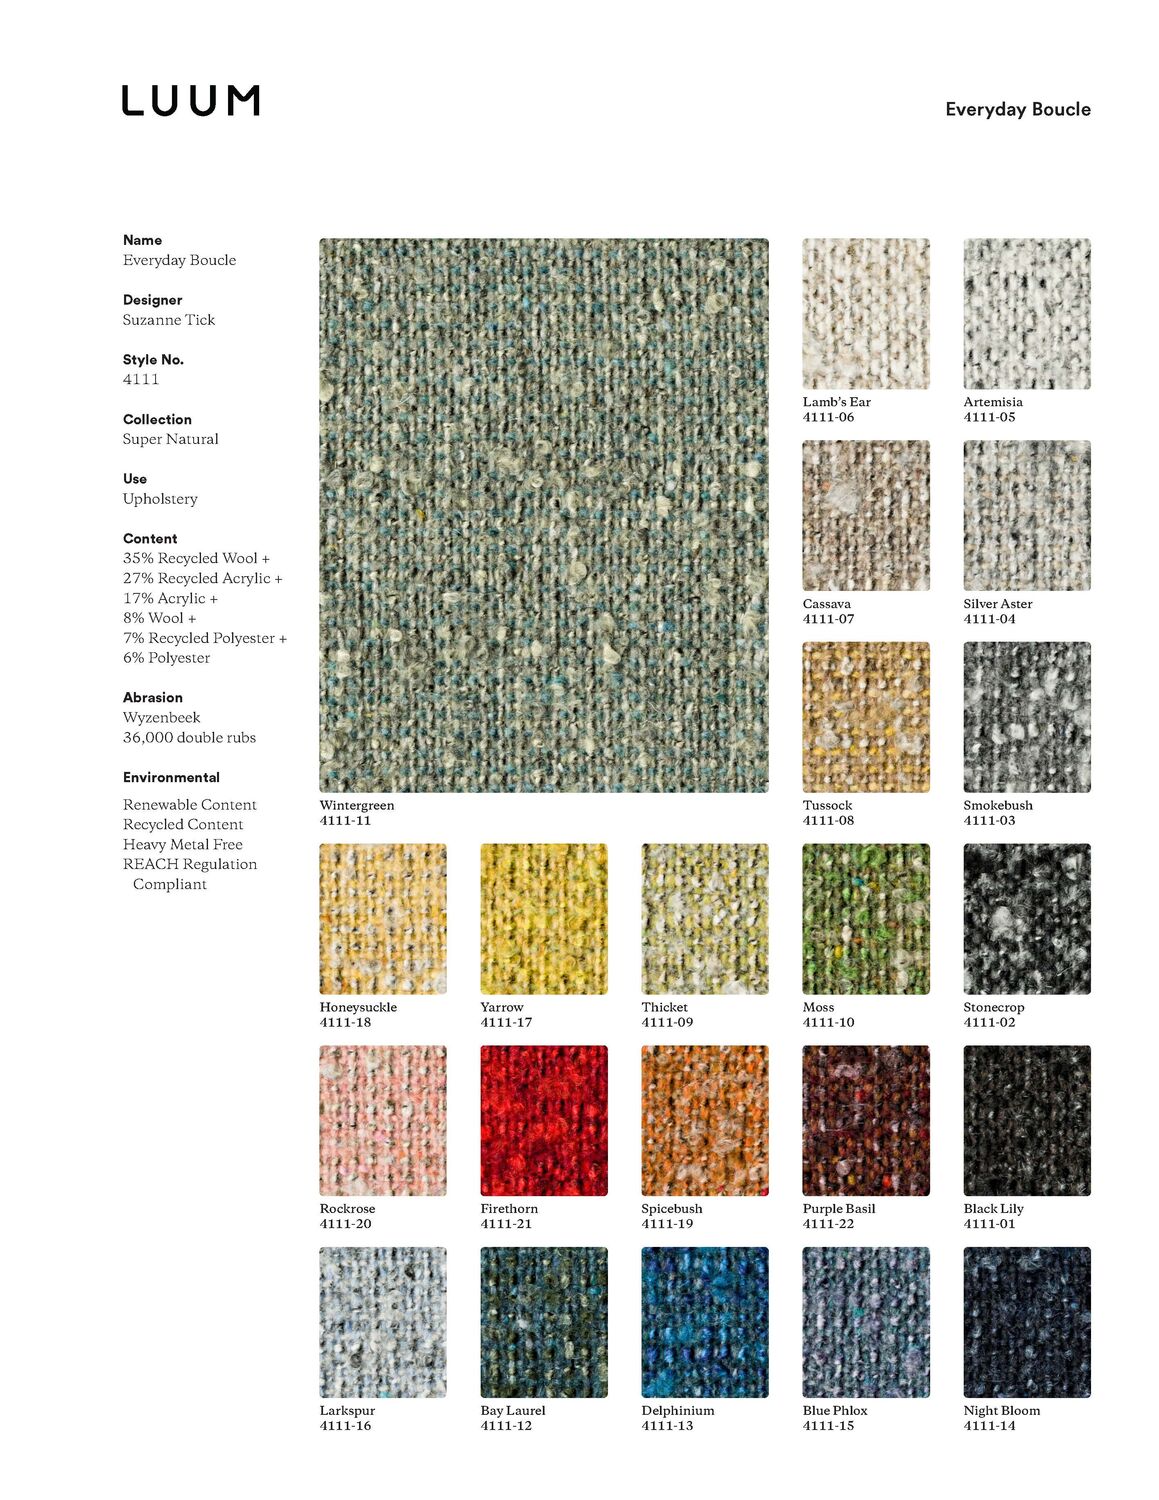 Everyday Boucle - Silver Aster - 4111 - 04 Sample Card